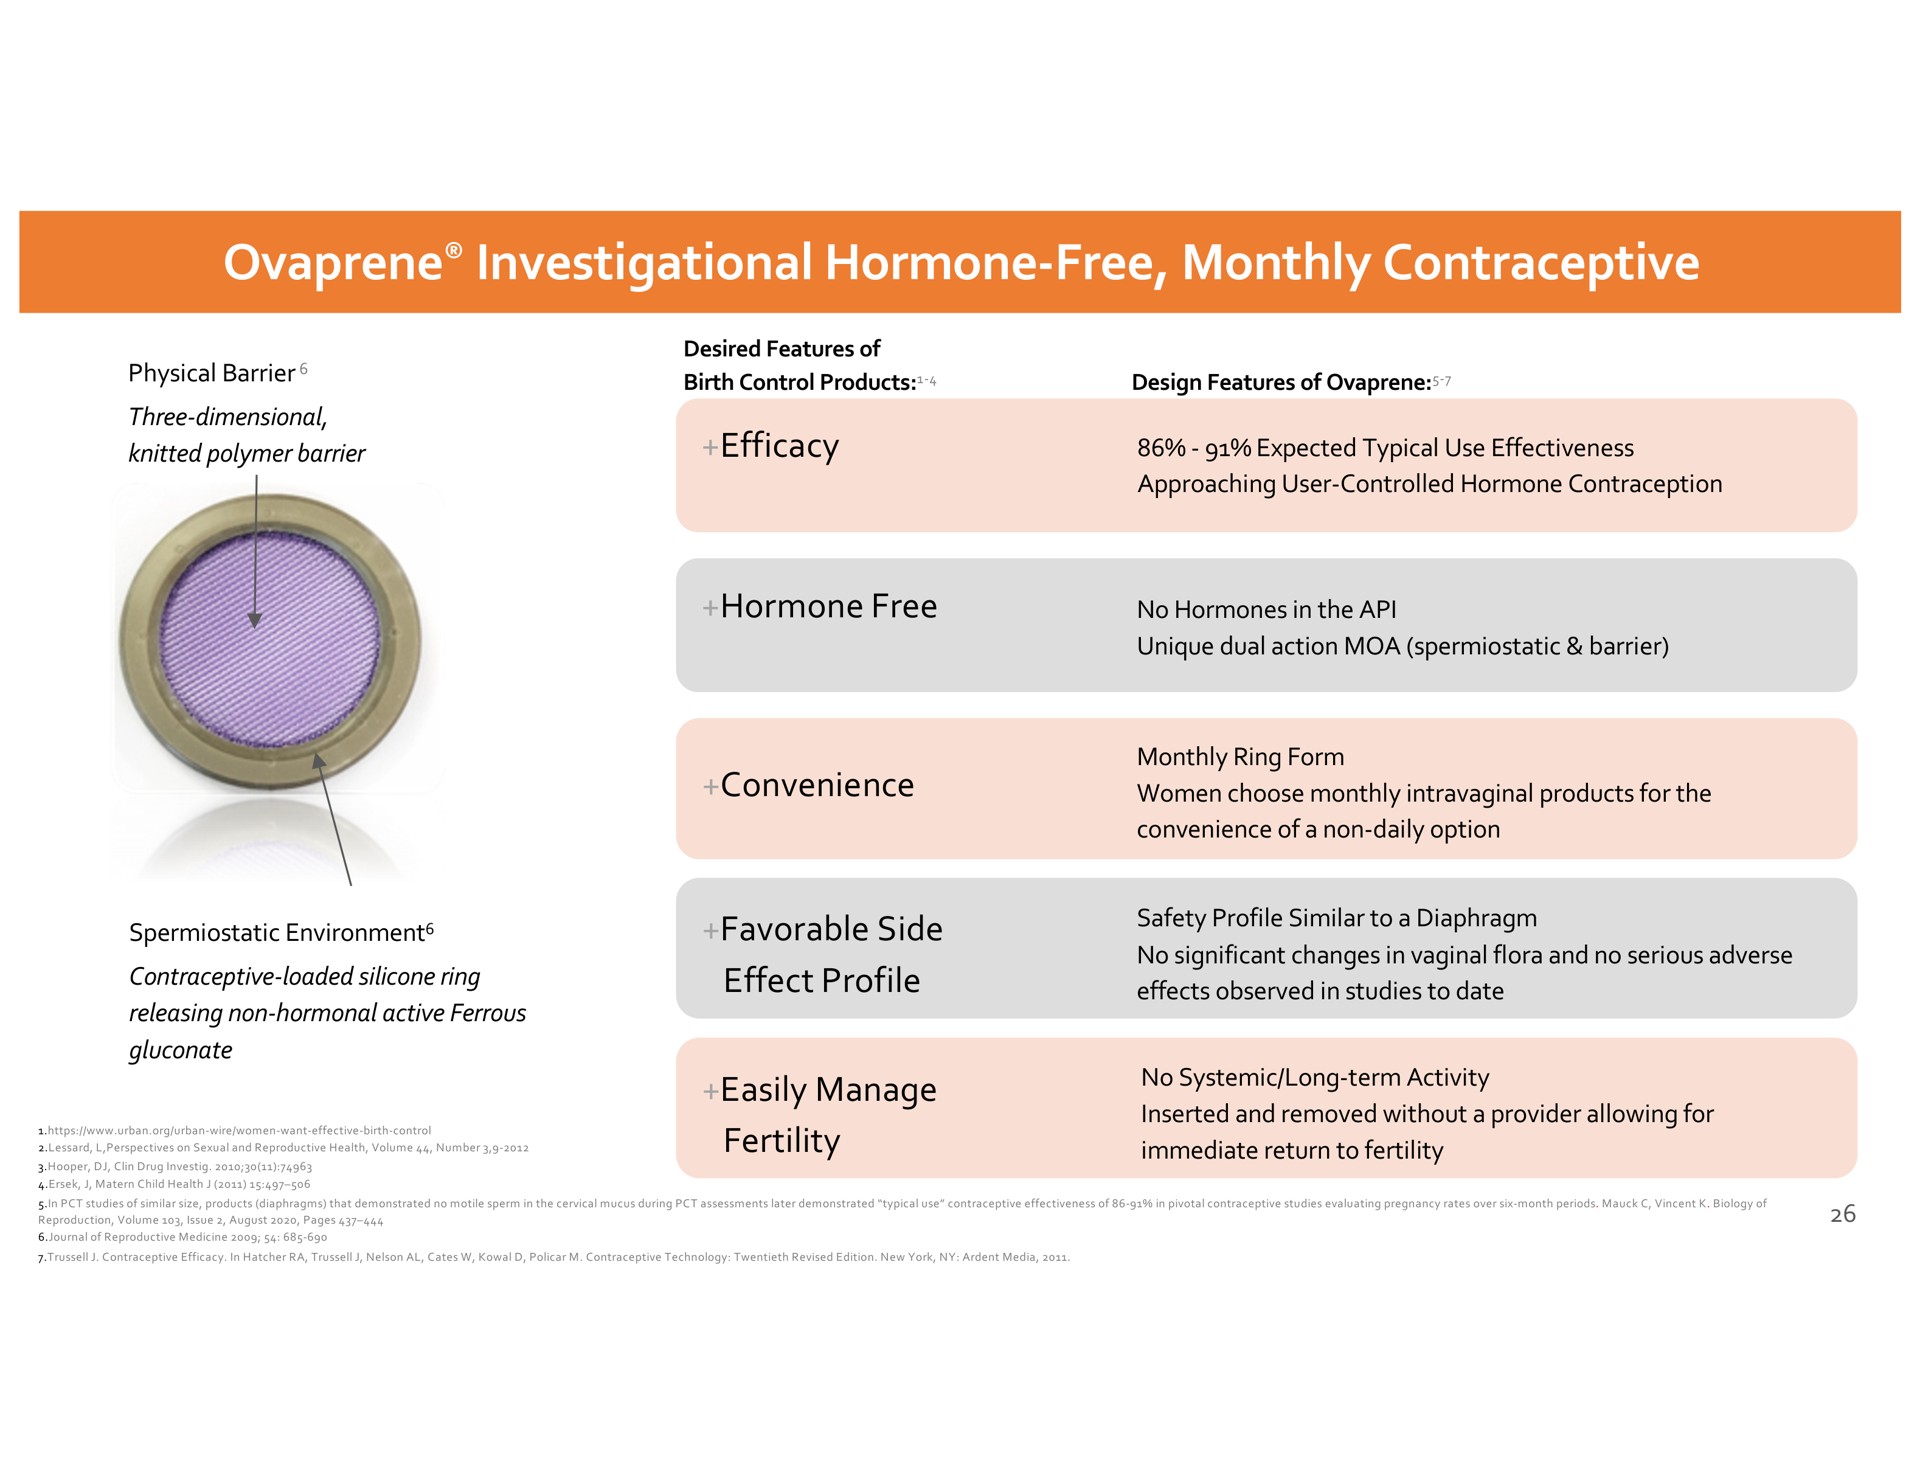 investigational hormone free monthly contraceptive efficacy hormone free convenience favorable side effect profile easily manage fertility safety similar to a diaphragm environments | Dare Bioscience